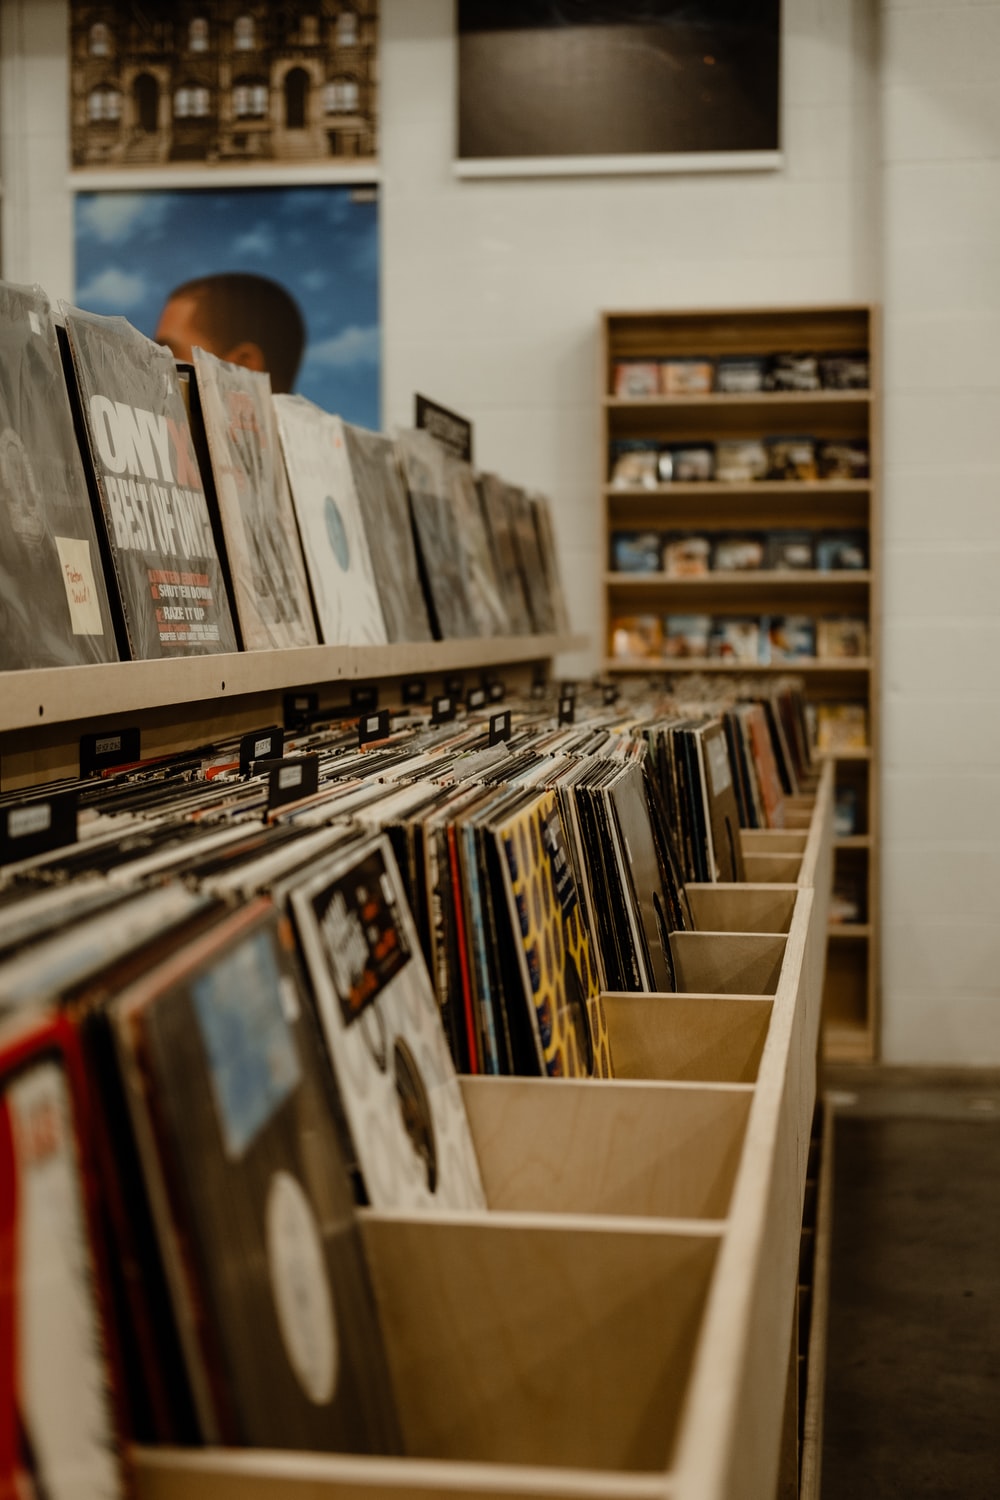 Record Store Picture. Download Free Image